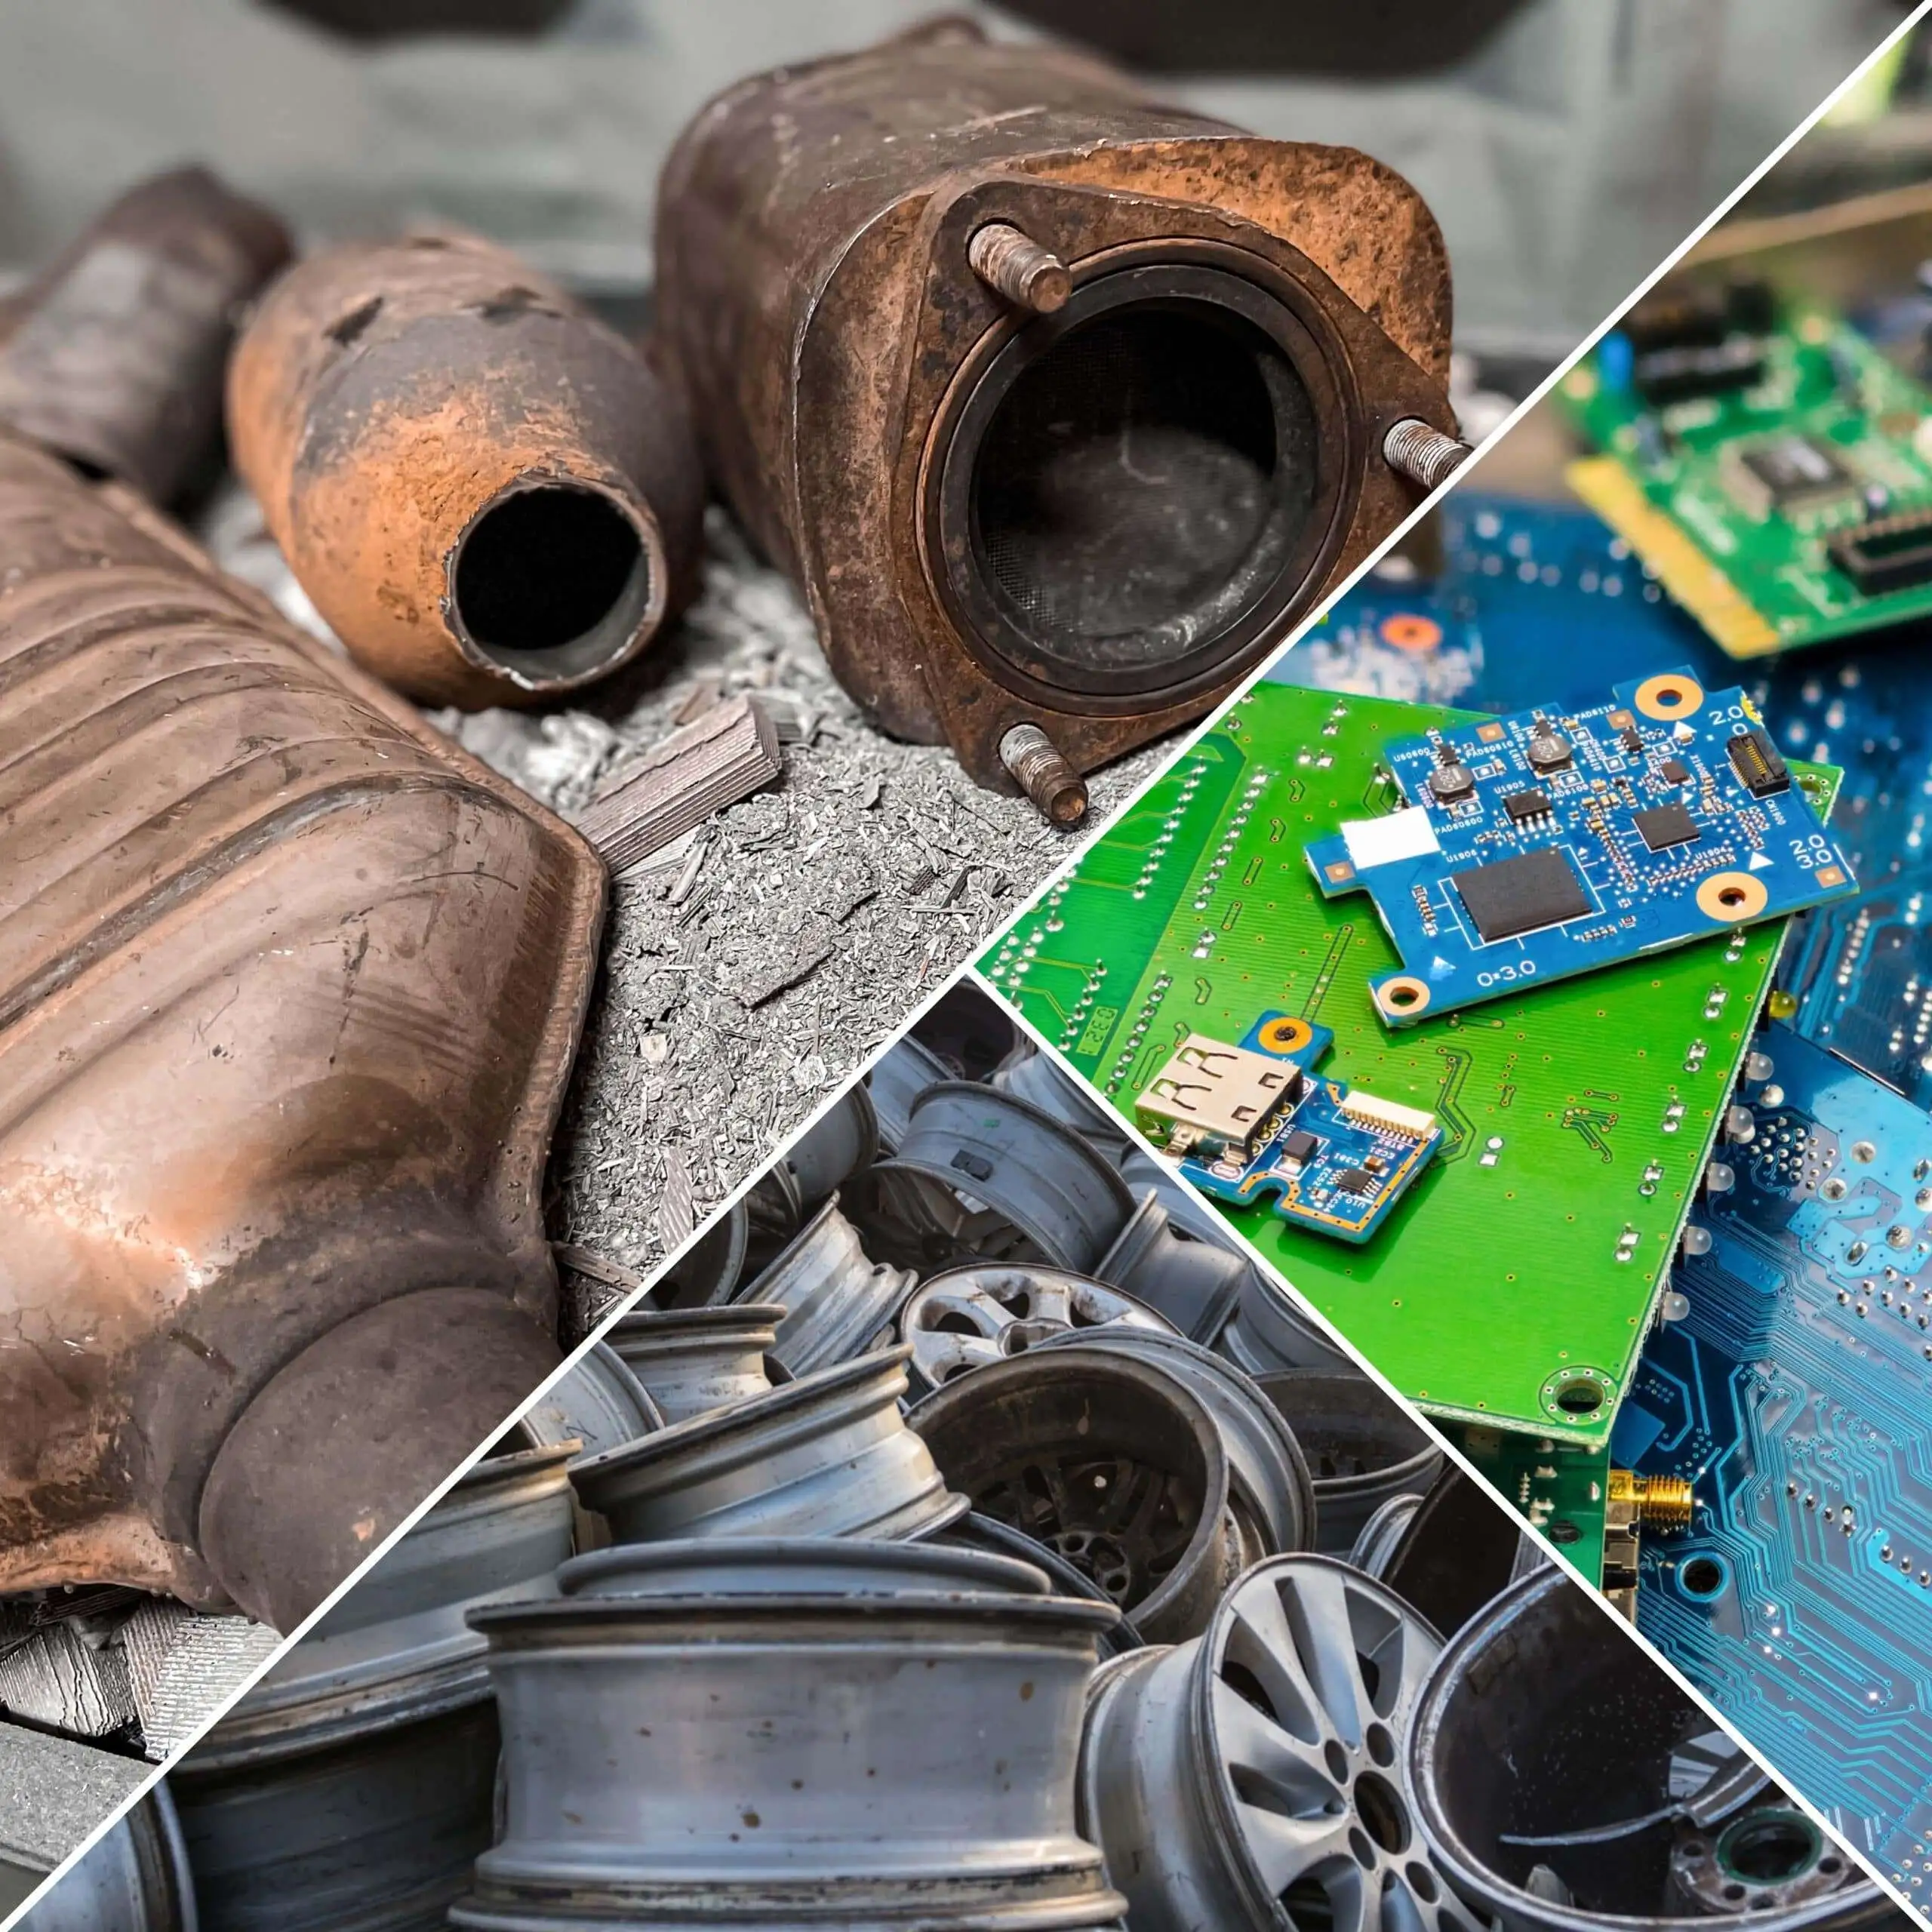 Catalytic Converters, Electronic Waste, Non-Ferrous Metals